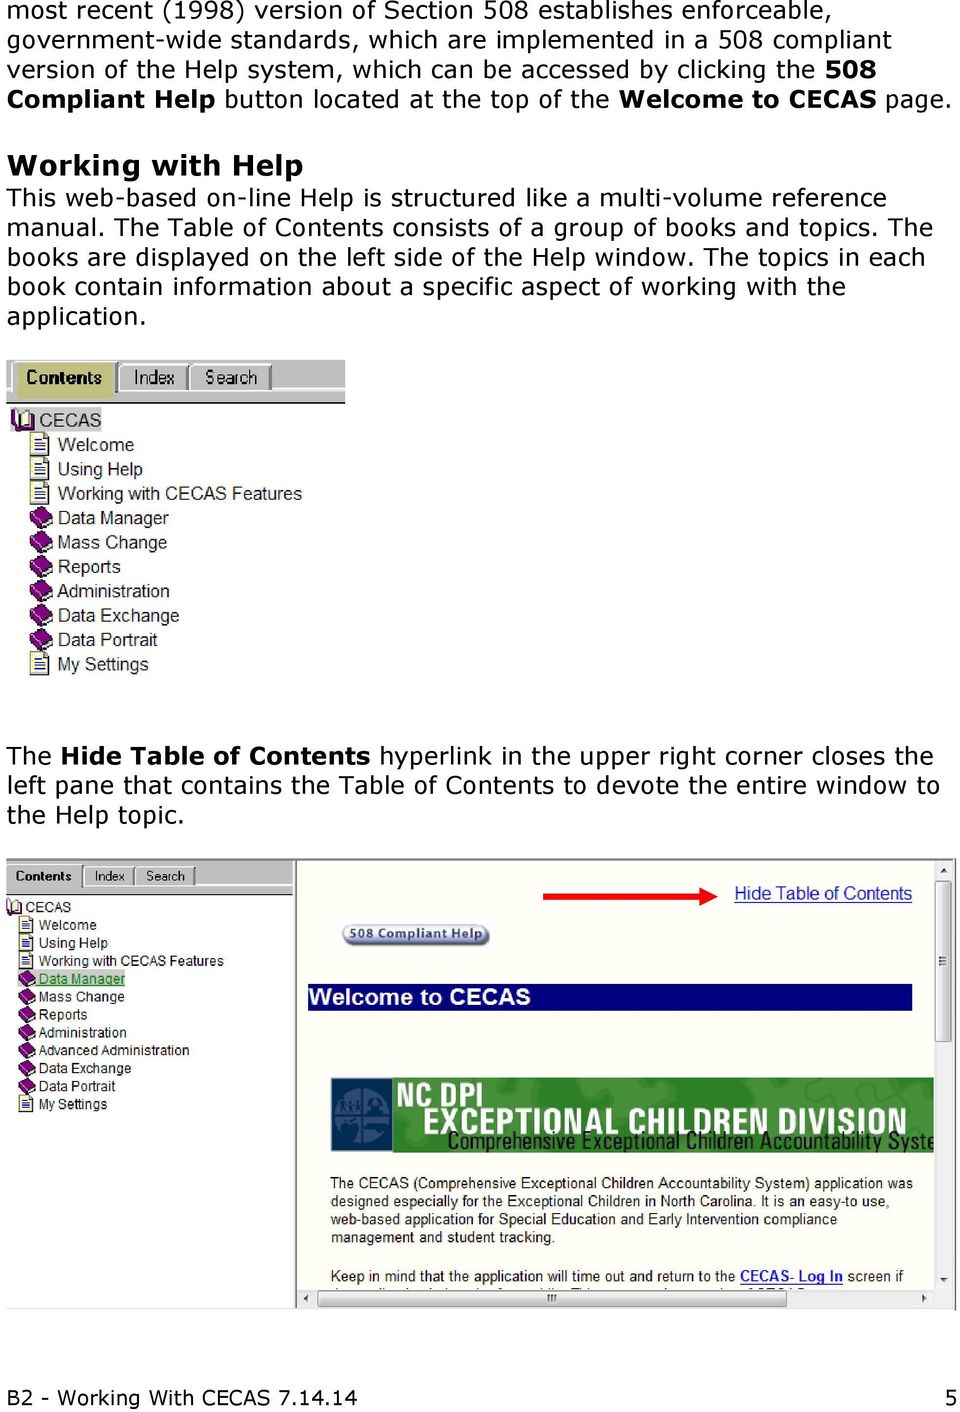 The Table of Contents consists of a group of books and topics. The books are displayed on the left side of the Help window.